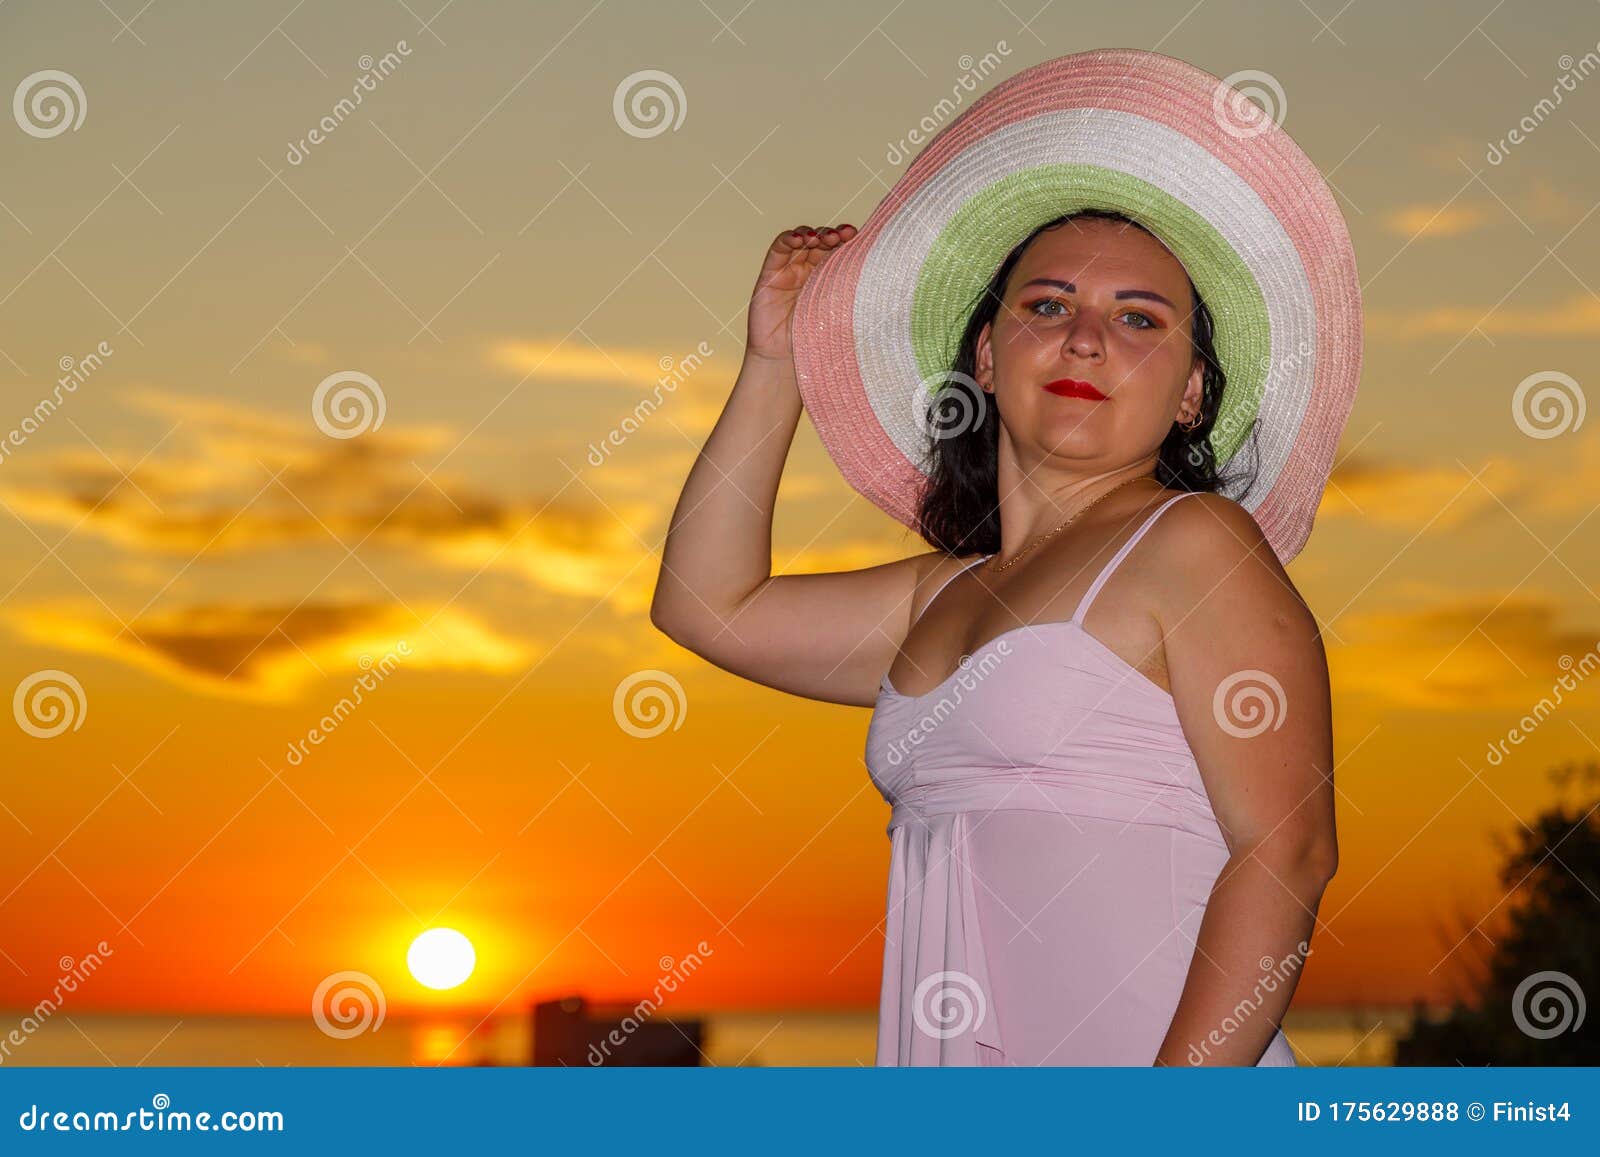 jewish woman in a hat at sunset on a background of the sea.